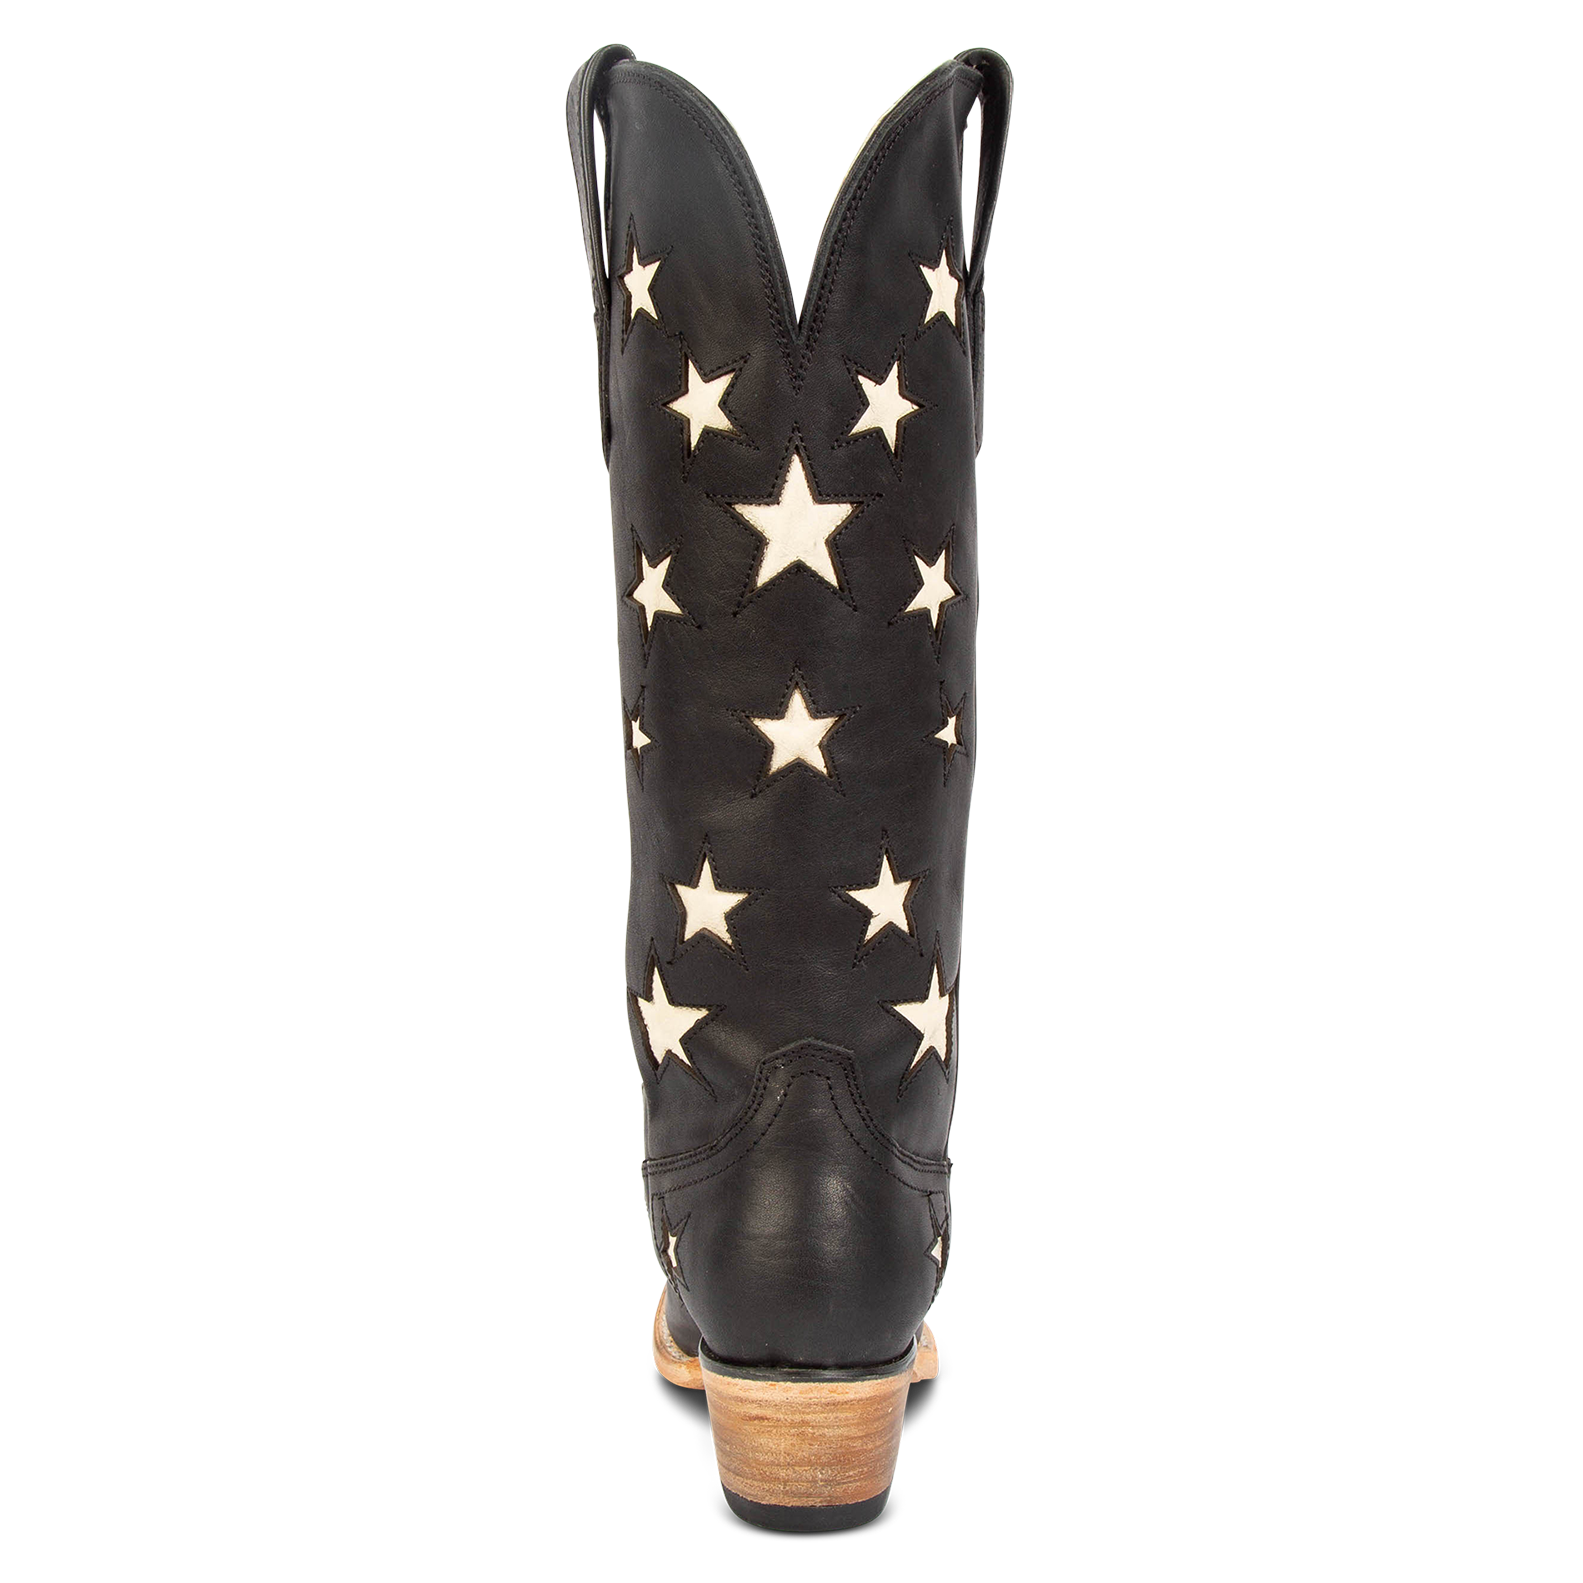 Back view showing star inlay detailing and low heel on FREEBIRD women's Starzz black multi western boot